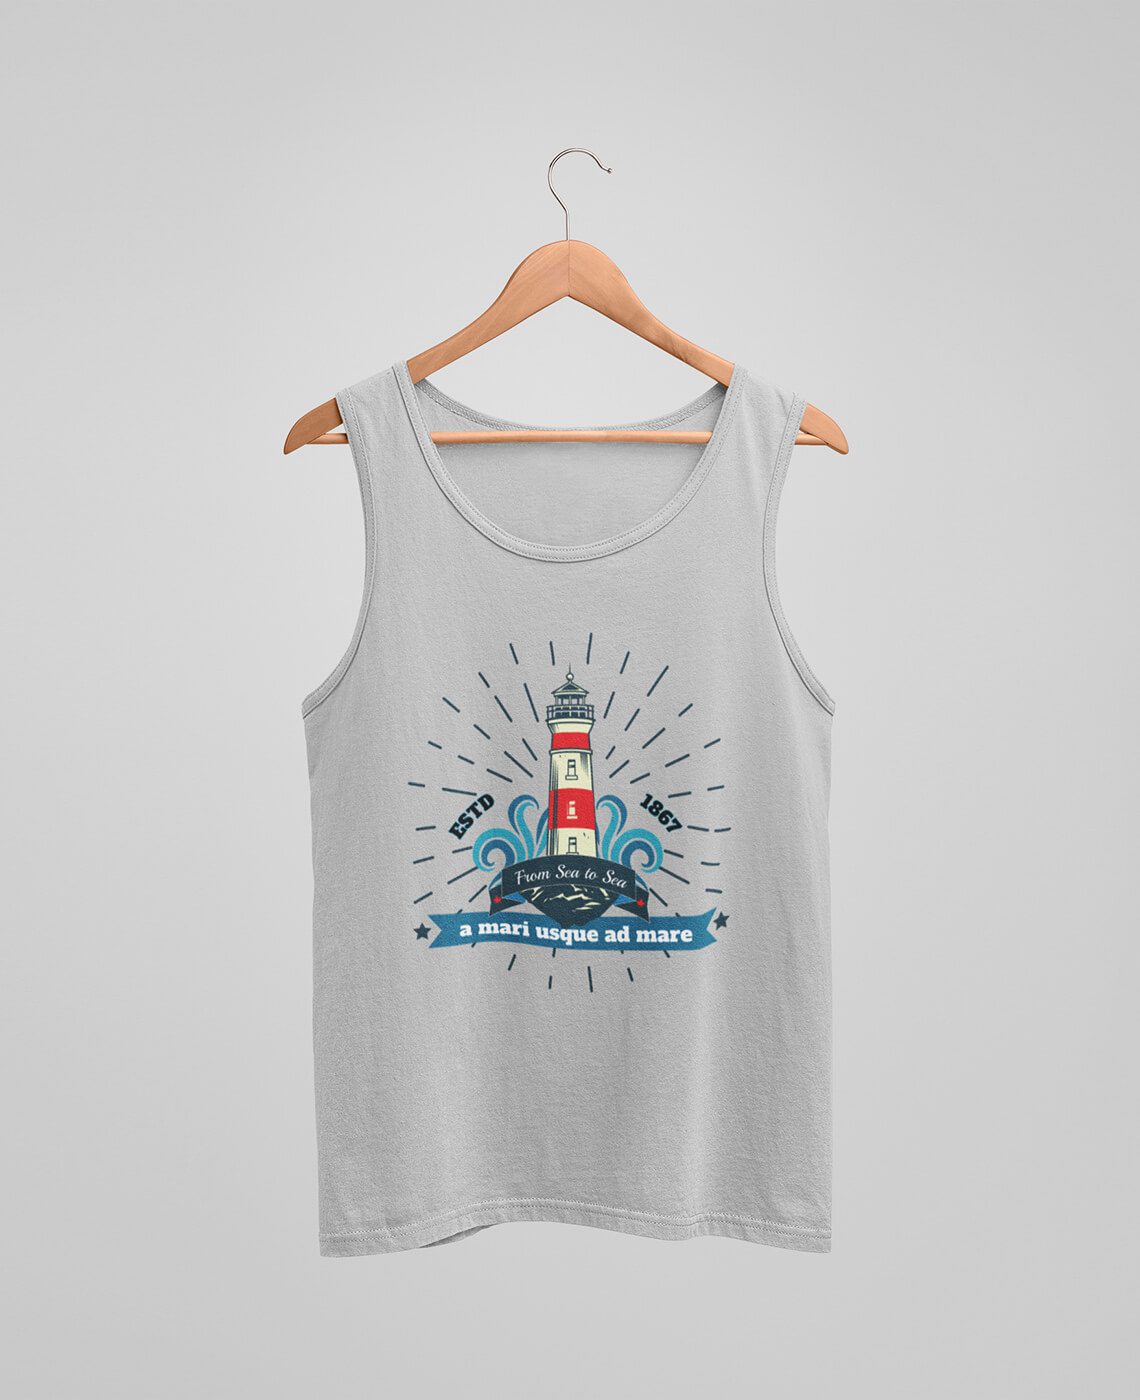 lighthouse one7 mens tank top 2